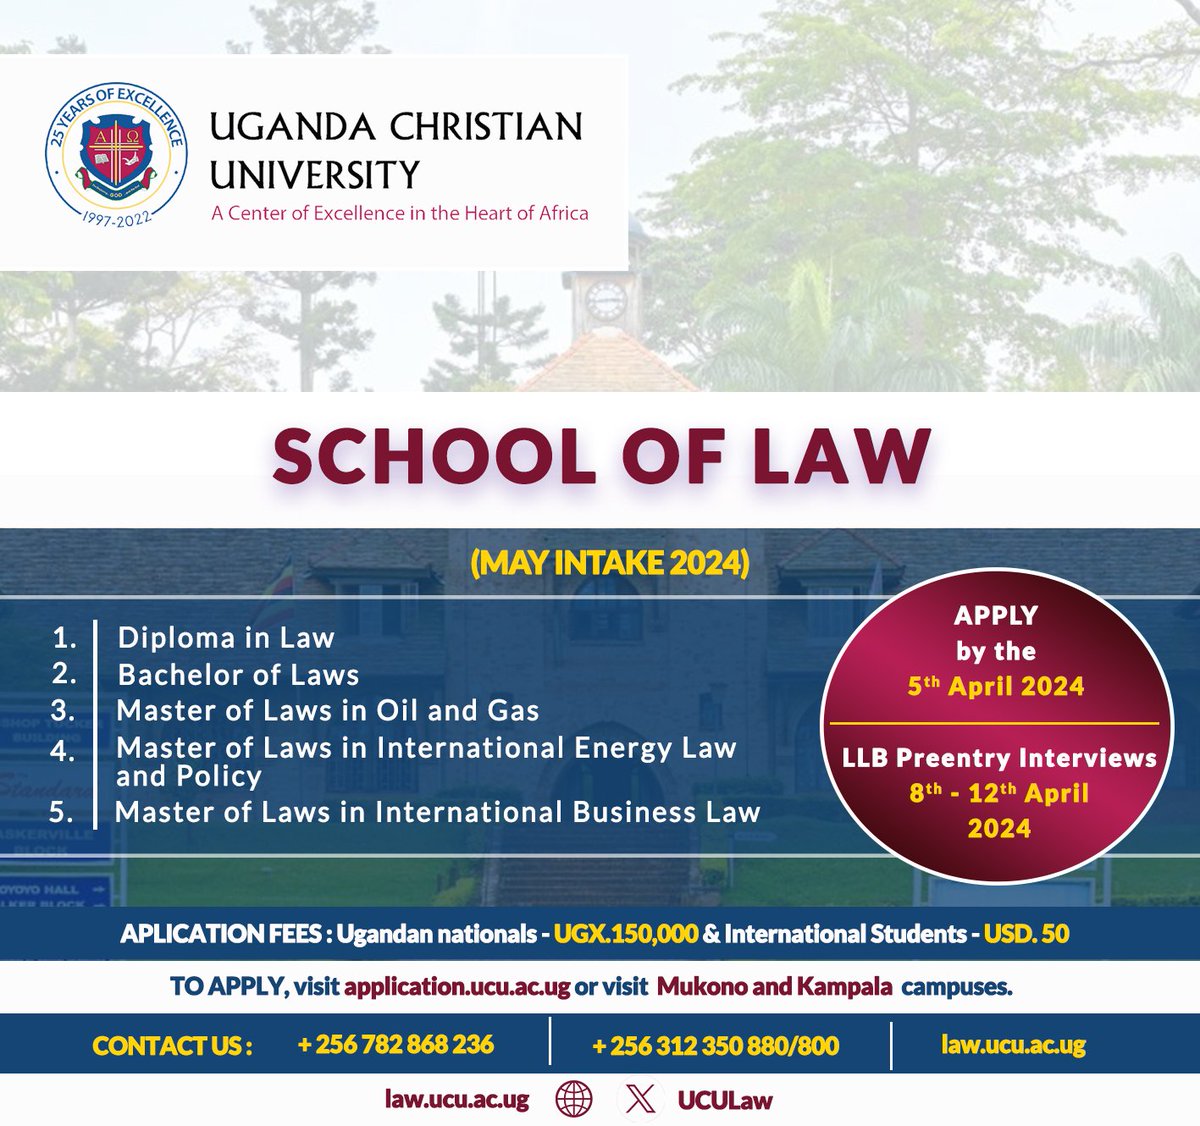 We are still receiving applications for our law programs. The deadline to enrol into the @UCUniversity diploma, bachelors and masters programs has been extended upto the 5th April. The Pre entry exams for the bachelors will now take place between 8th and 12th April. #ApplyNow.